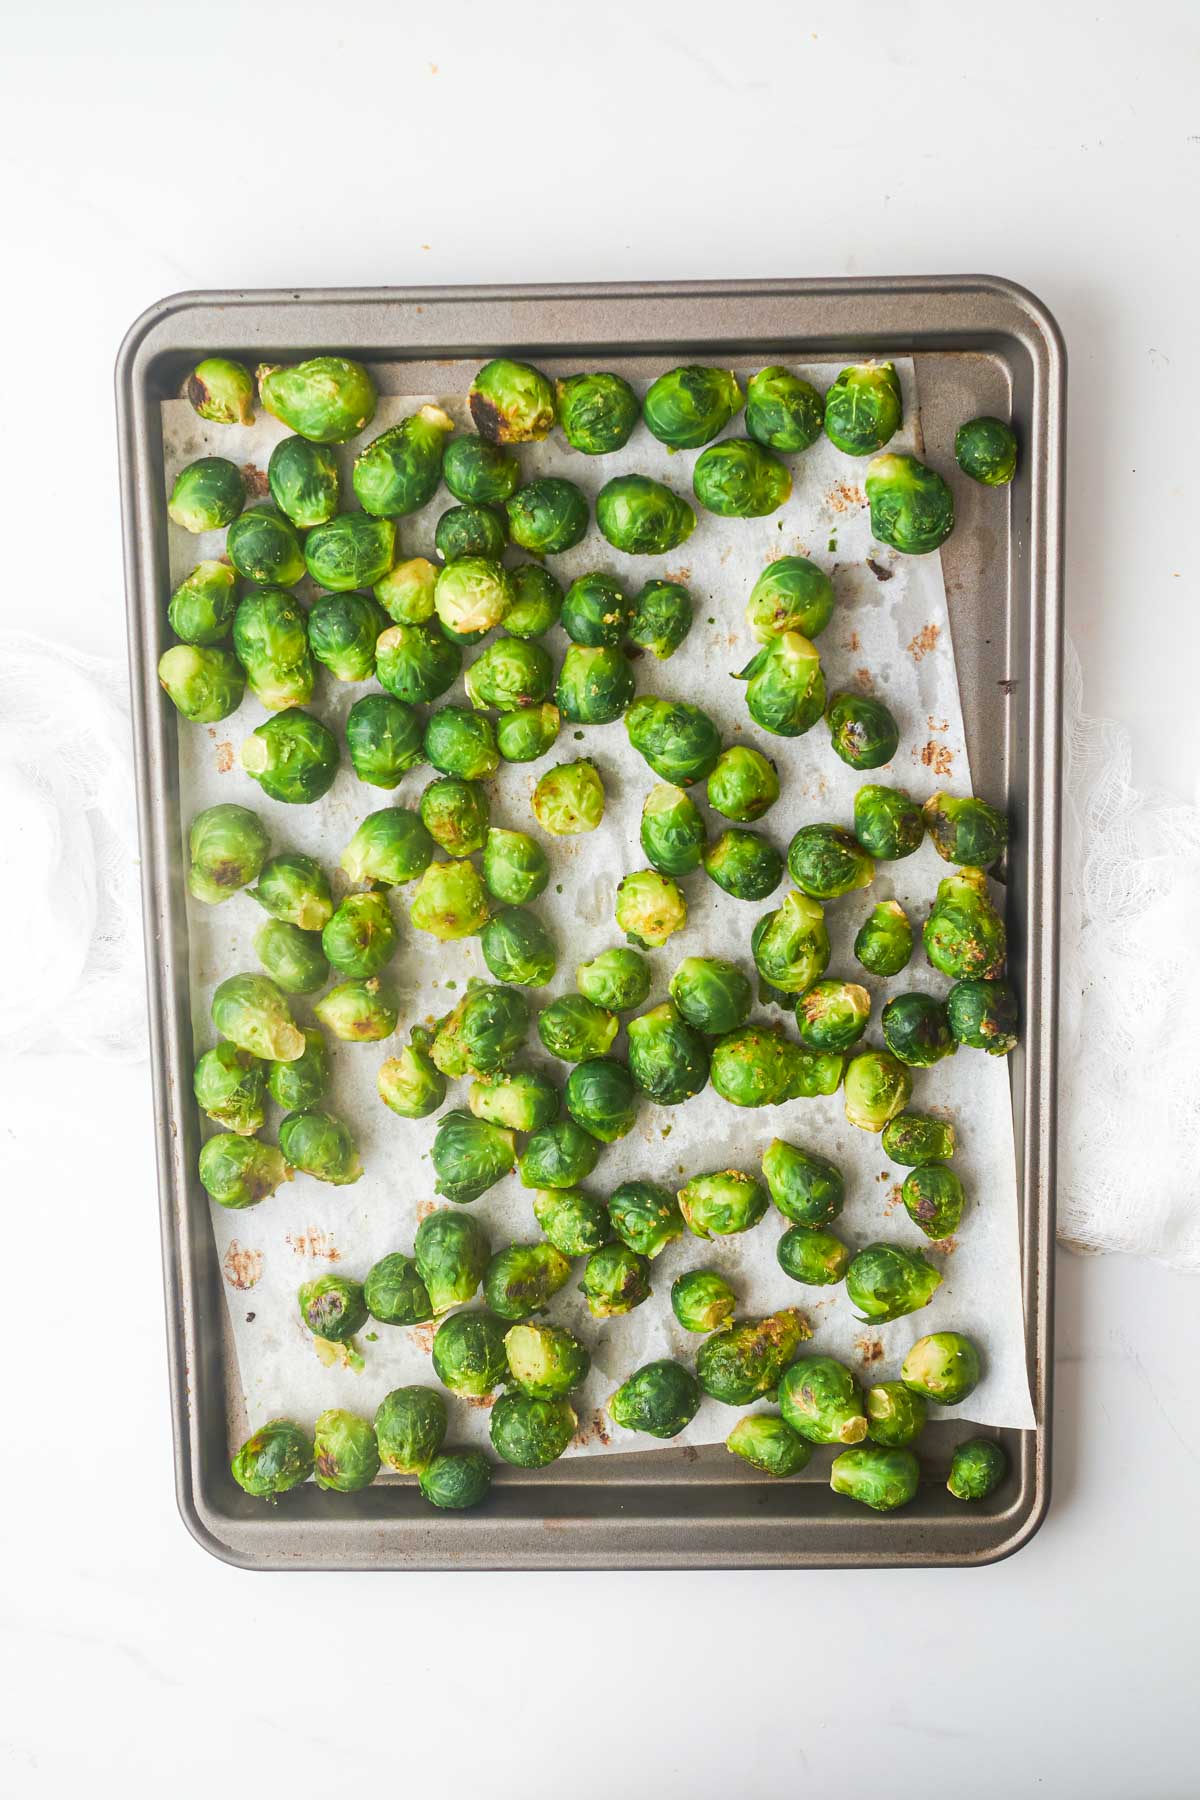 the finished roasted frozen brussel sprouts on a sheet pan